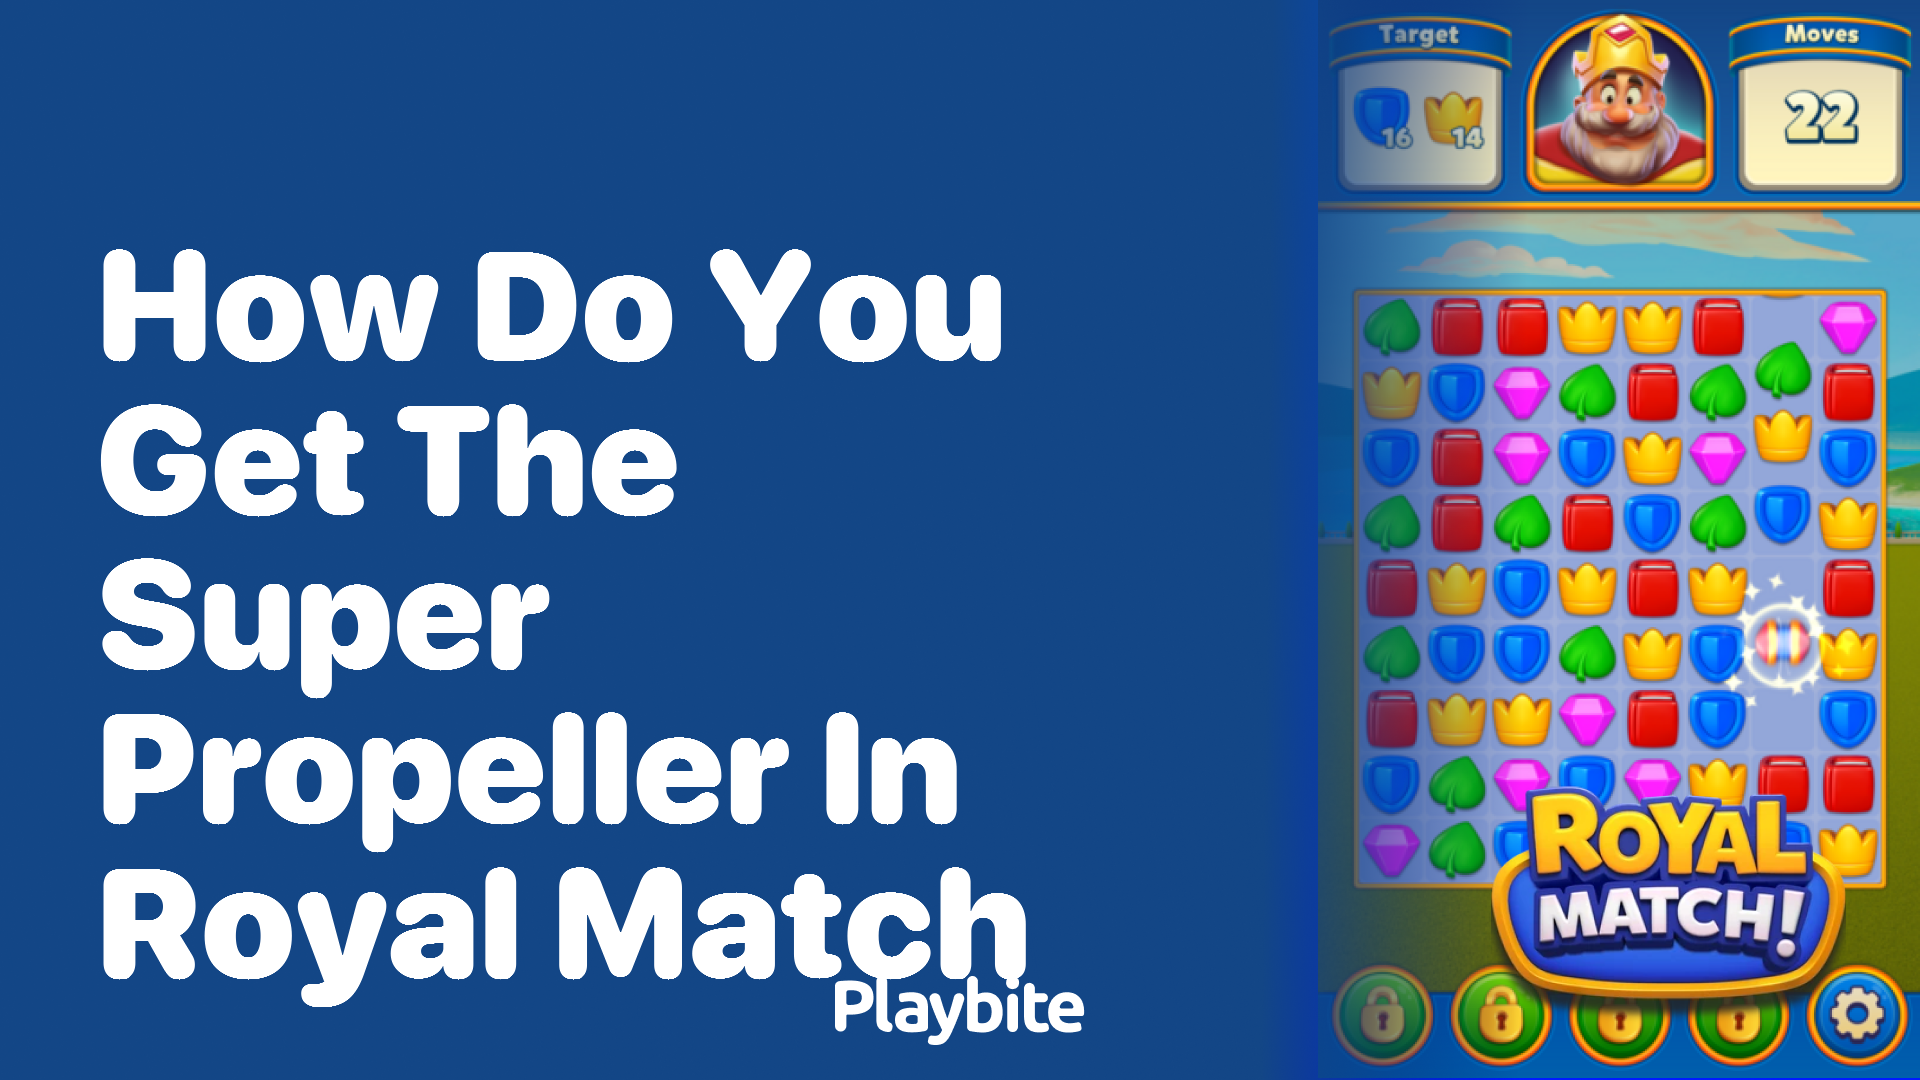 How Do You Get the Super Propeller in Royal Match?